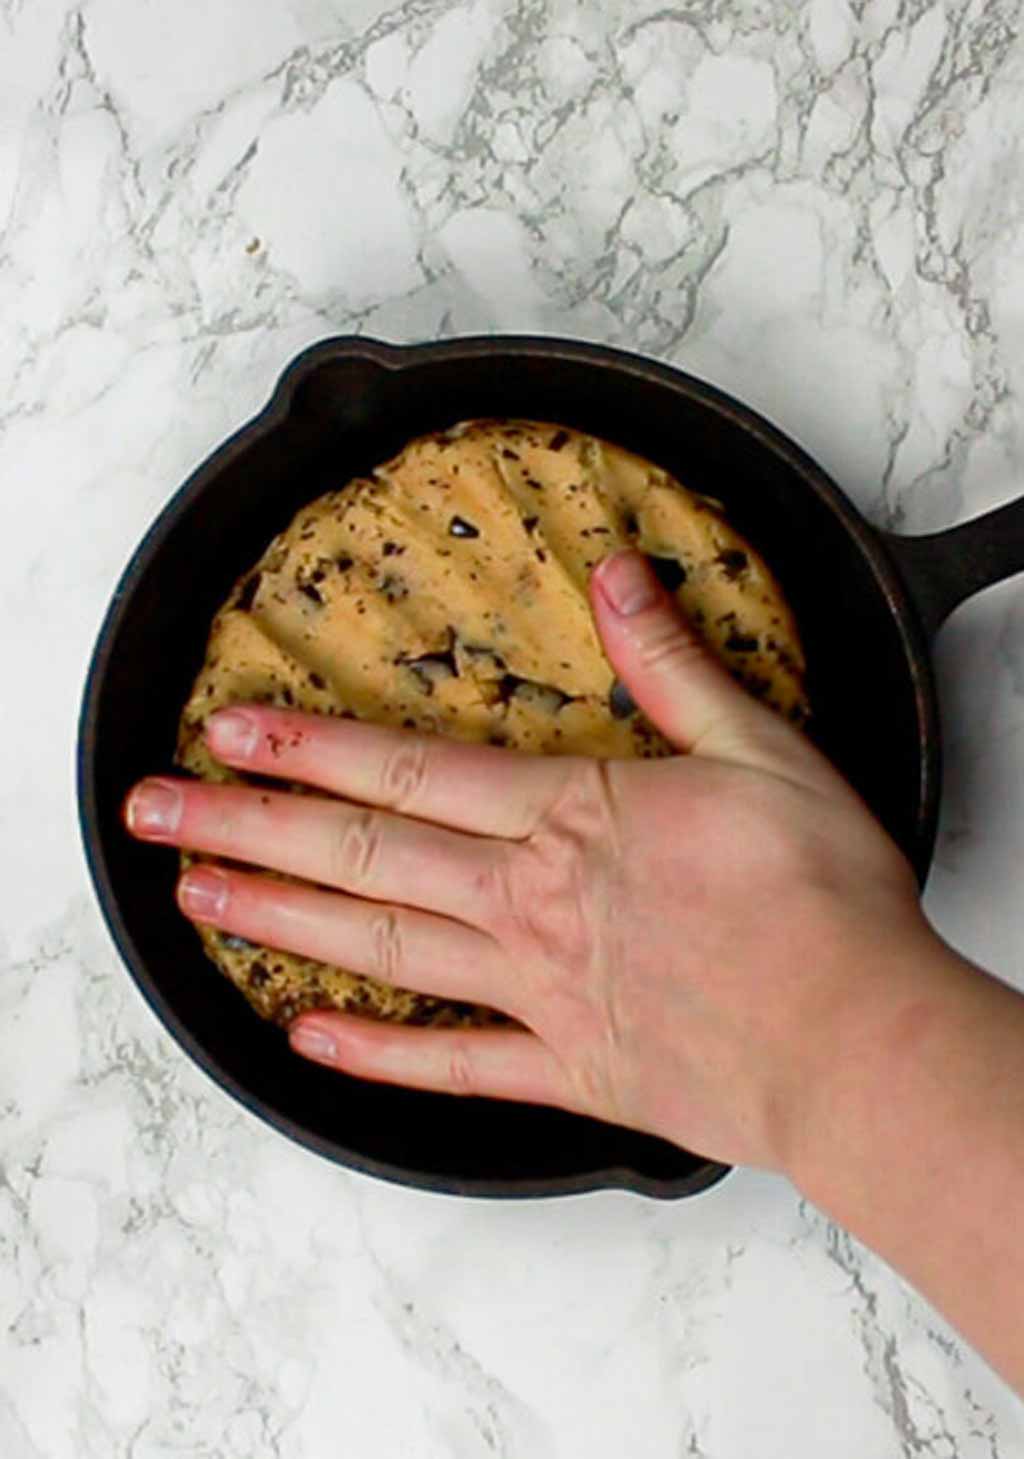 Pressing Cookie Dough Ball Into A Cast Iron Skillet